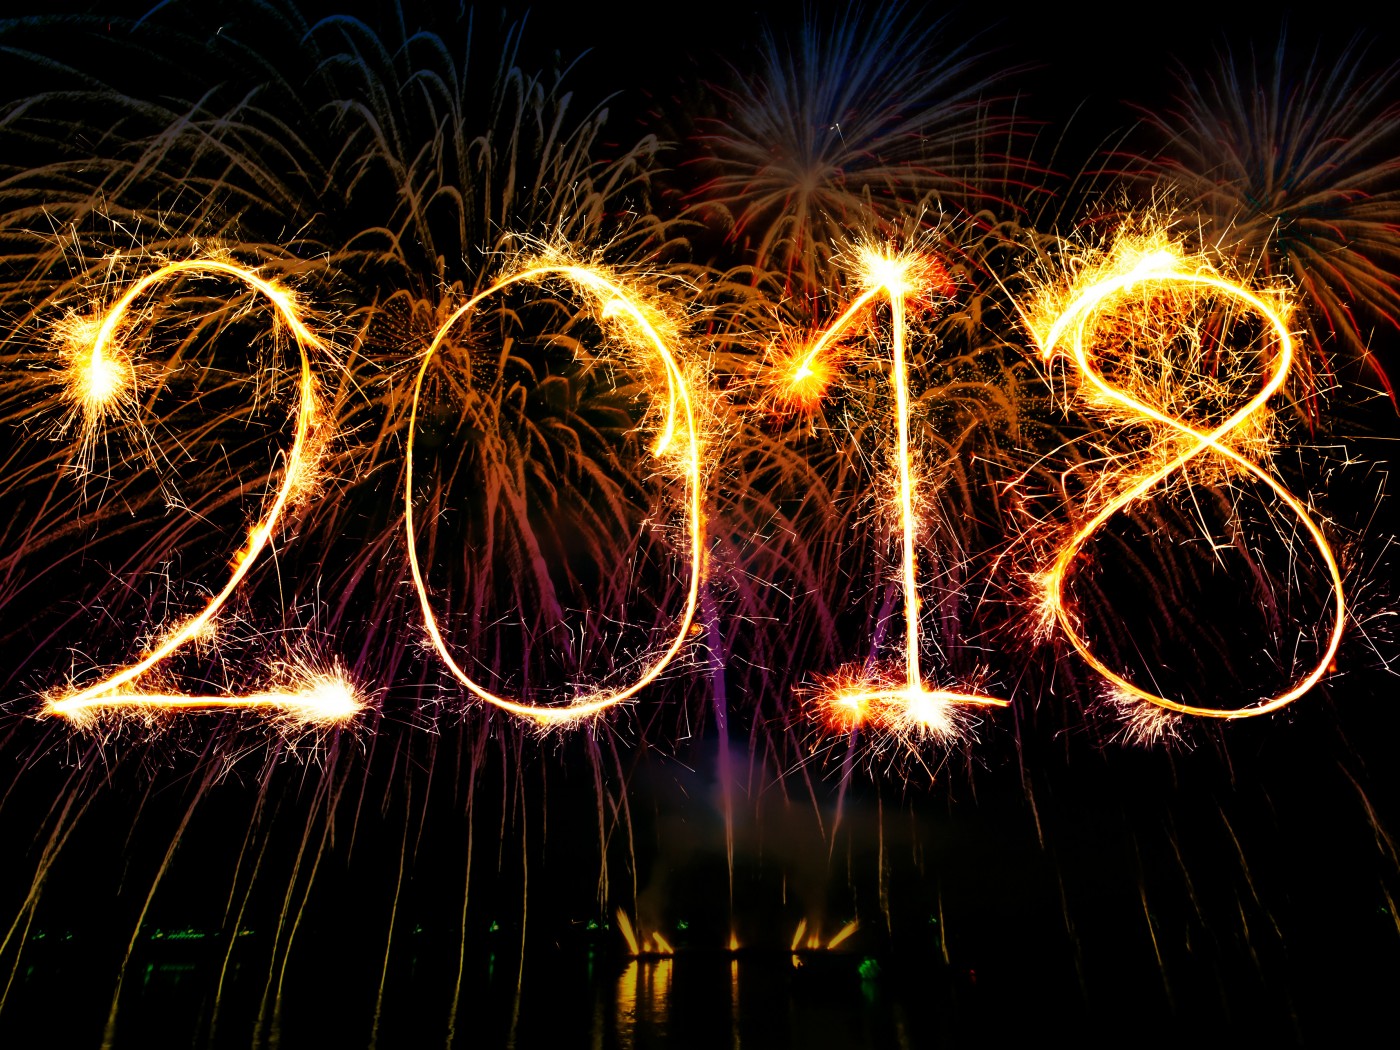 Happy New Year 2018 Hd Wallpaper for Desktop and Mobiles